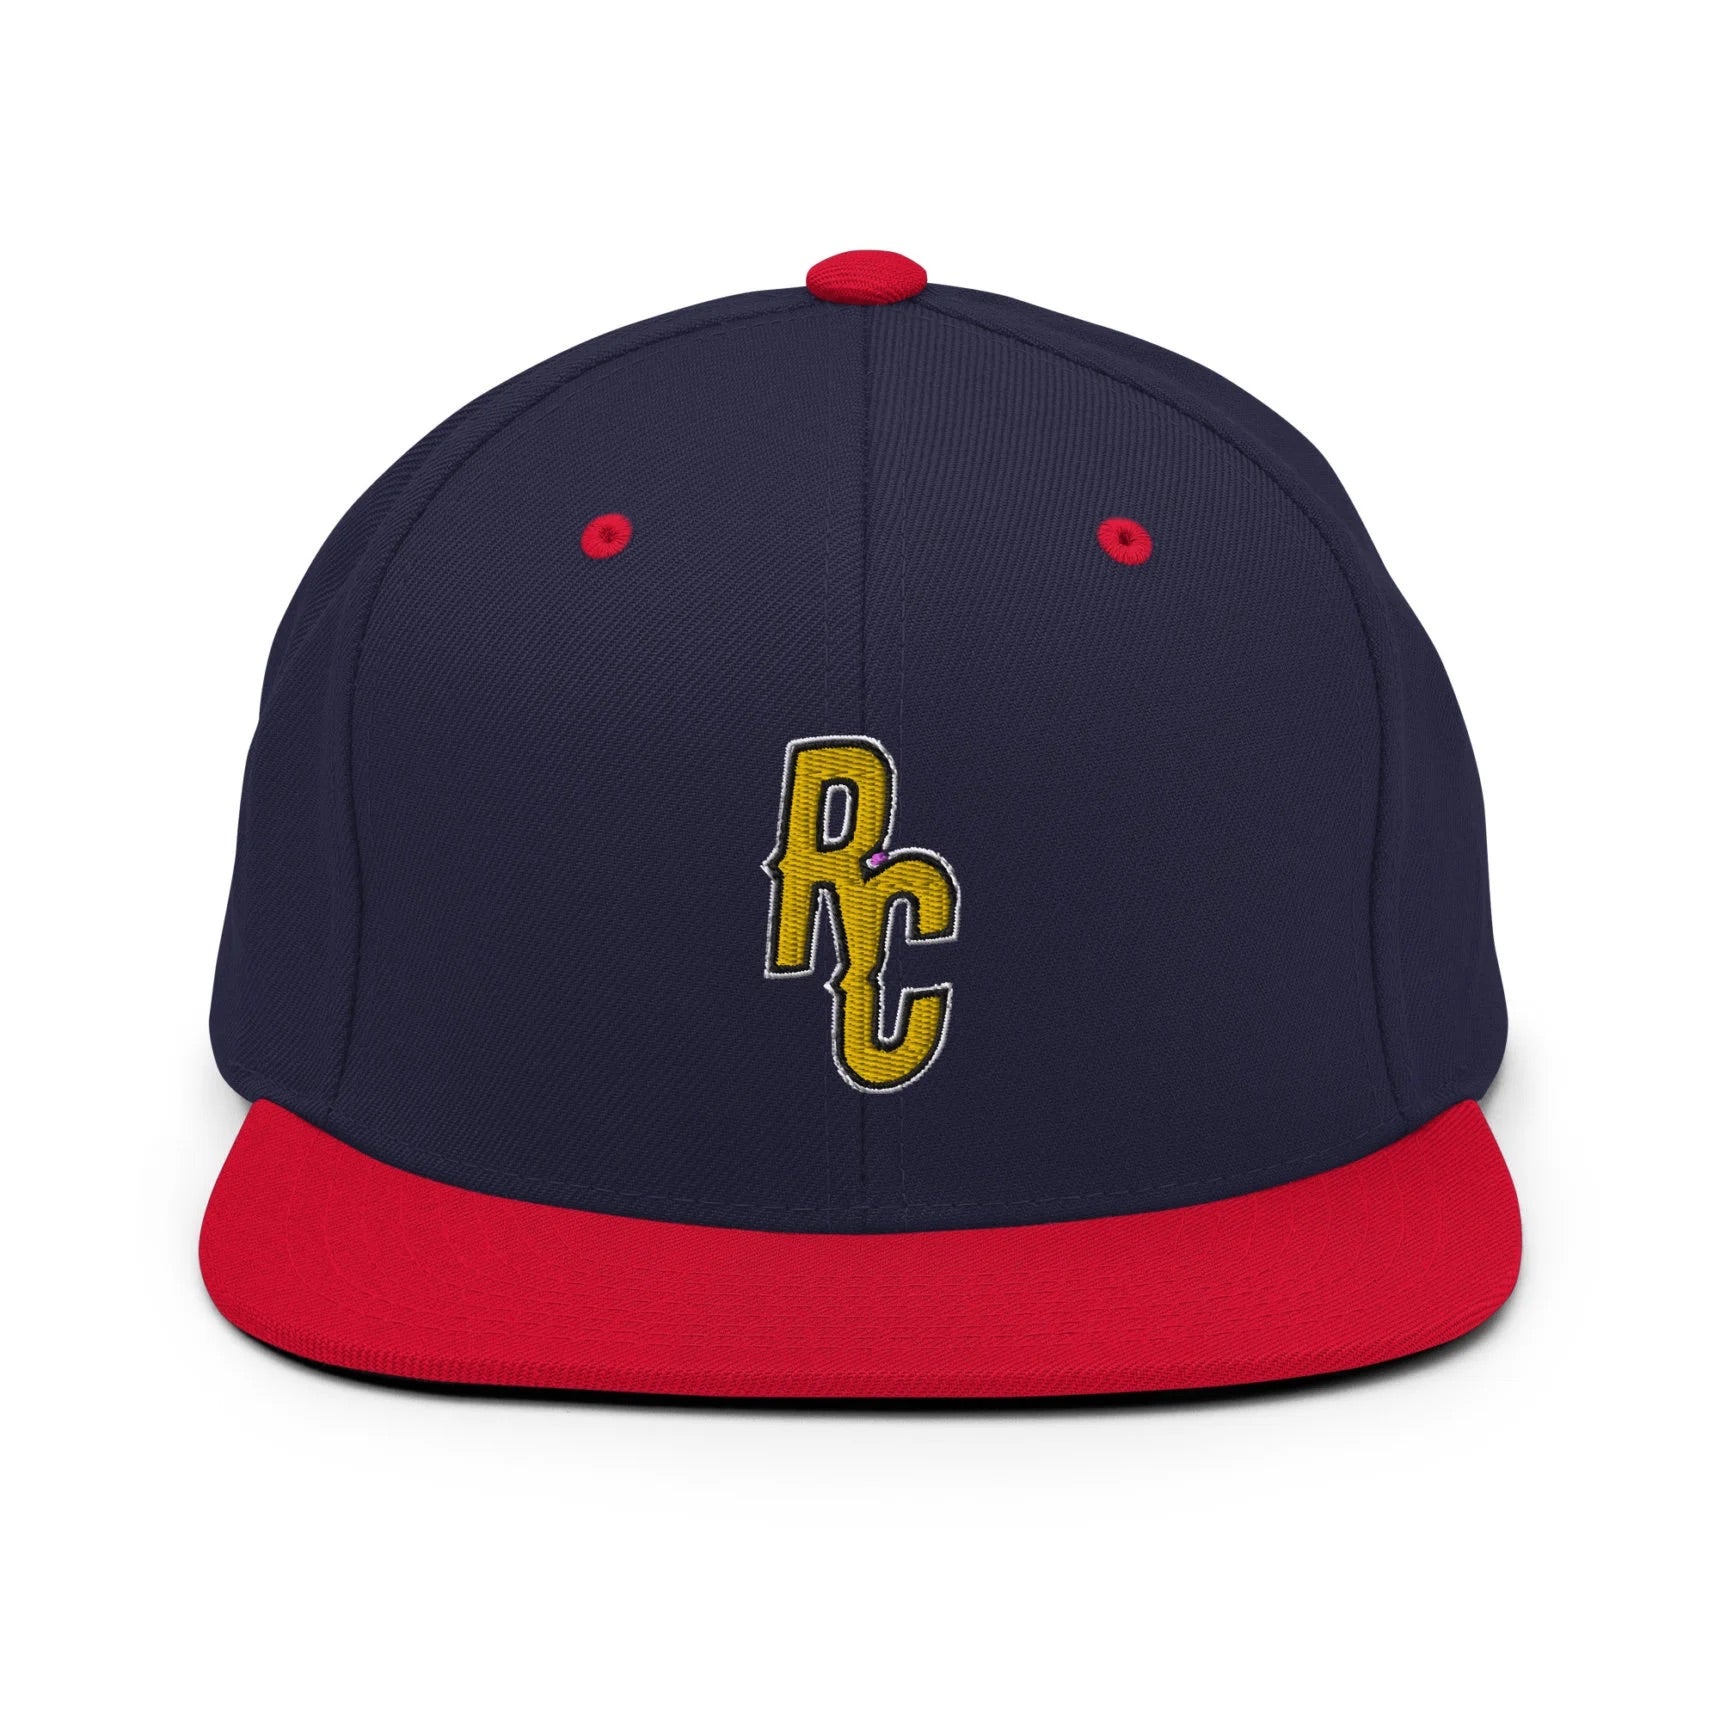 Ray Cheesy ShowZone snapback hat in navy with red brim and accents